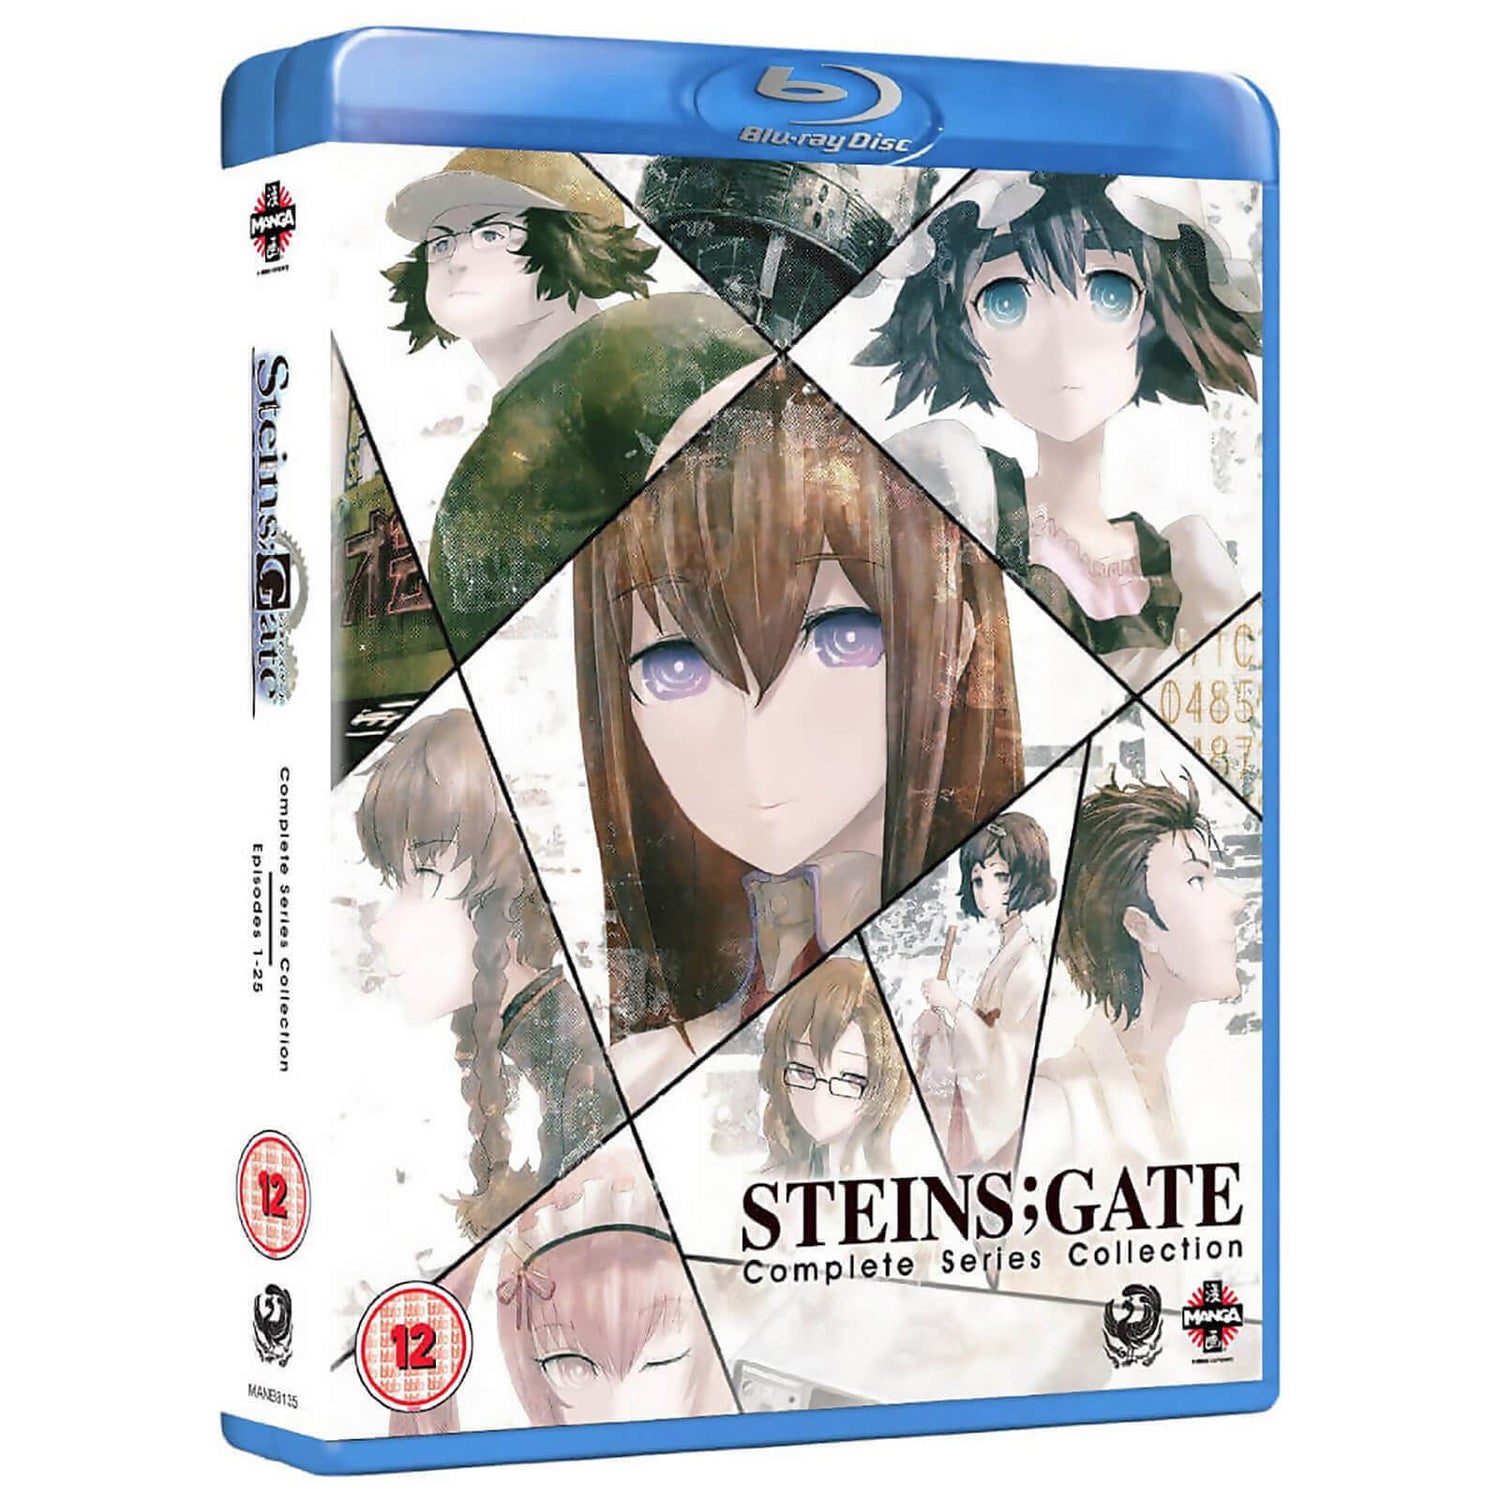 Steins Gate - The Complete Series Collection Blu-ray - Zavvi UK